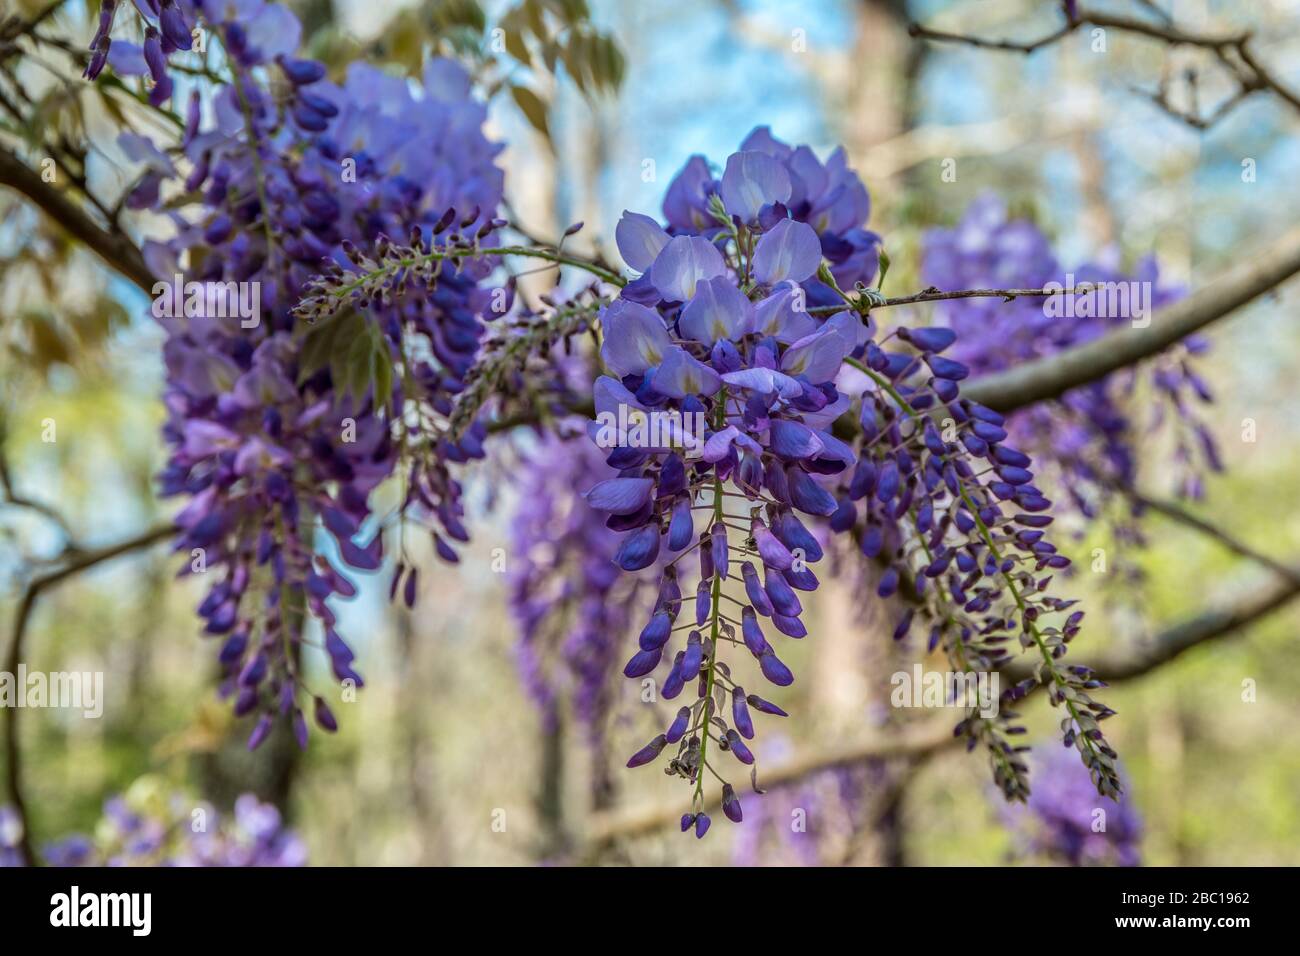 A purple flowering wisteria vine hanging from a tree branch just starting  to bloom in early spring on a bright sunny day Stock Photo - Alamy